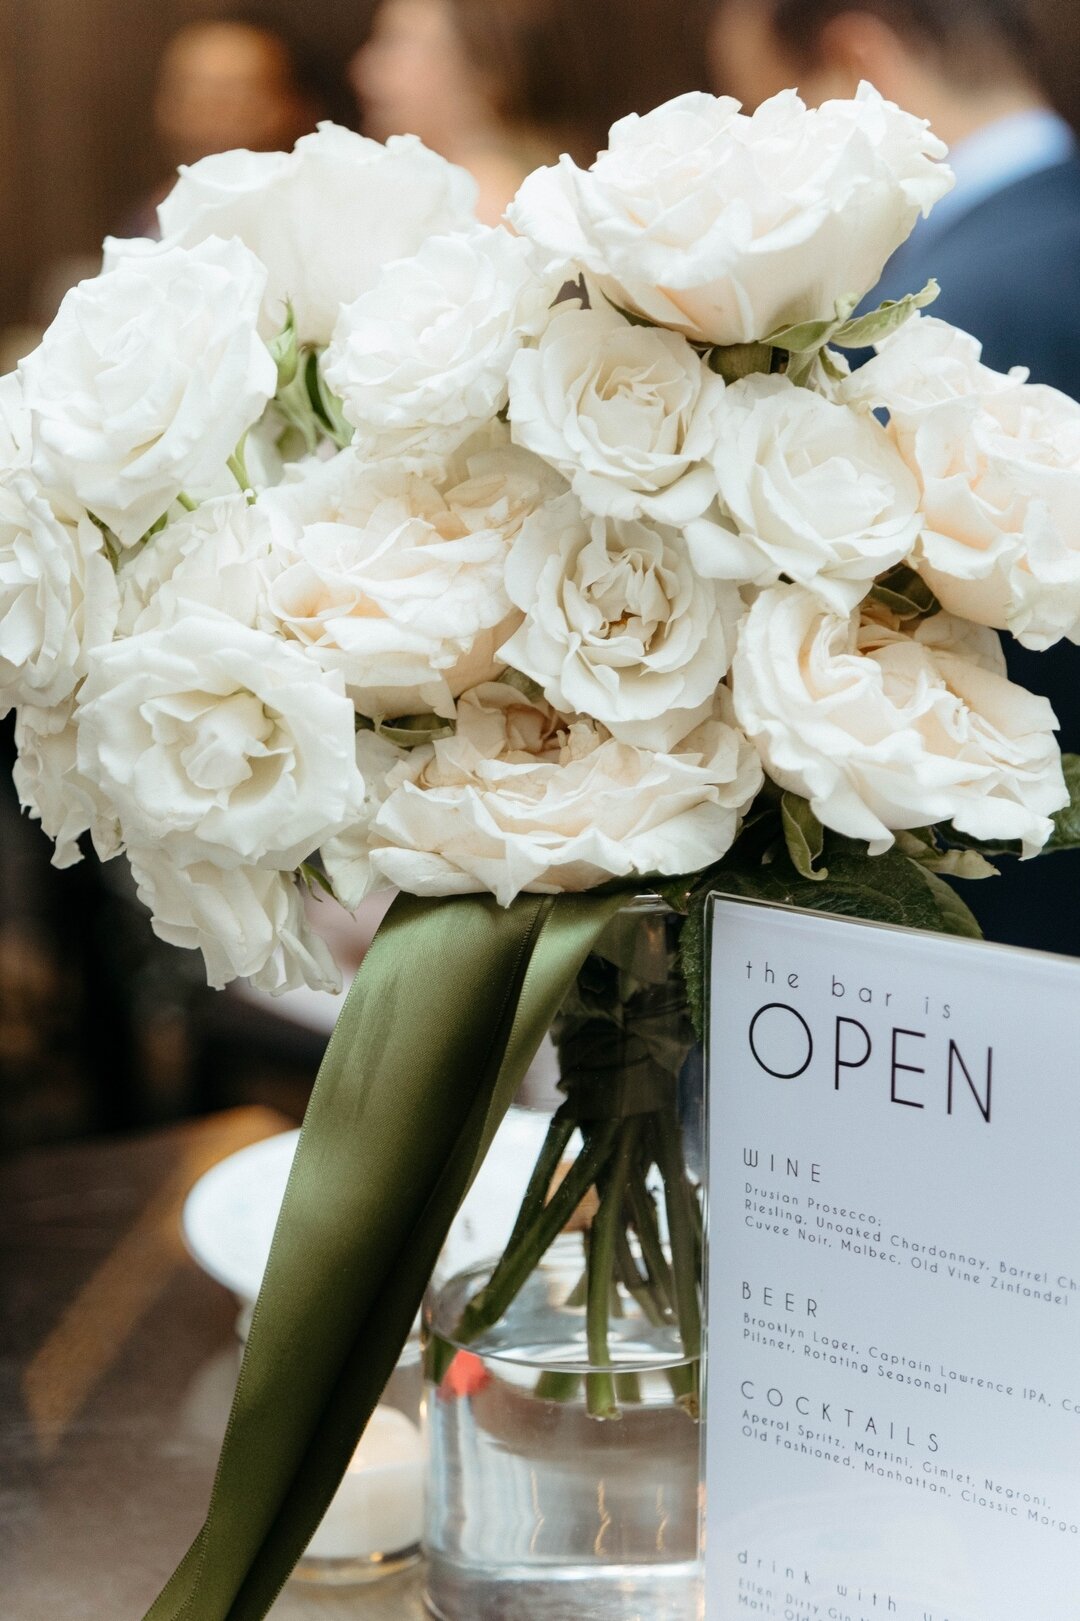 Embracing the beauty of this lovely centerpiece of delicate white roses and how it adds a little touch to the bar sign.⁣
Venue: @brooklynwinery
Florist: @fernbotnica
Photographer: @afteritallco
Musician: @nymusicentertainment 
Dj: @74events 
Makeup: 